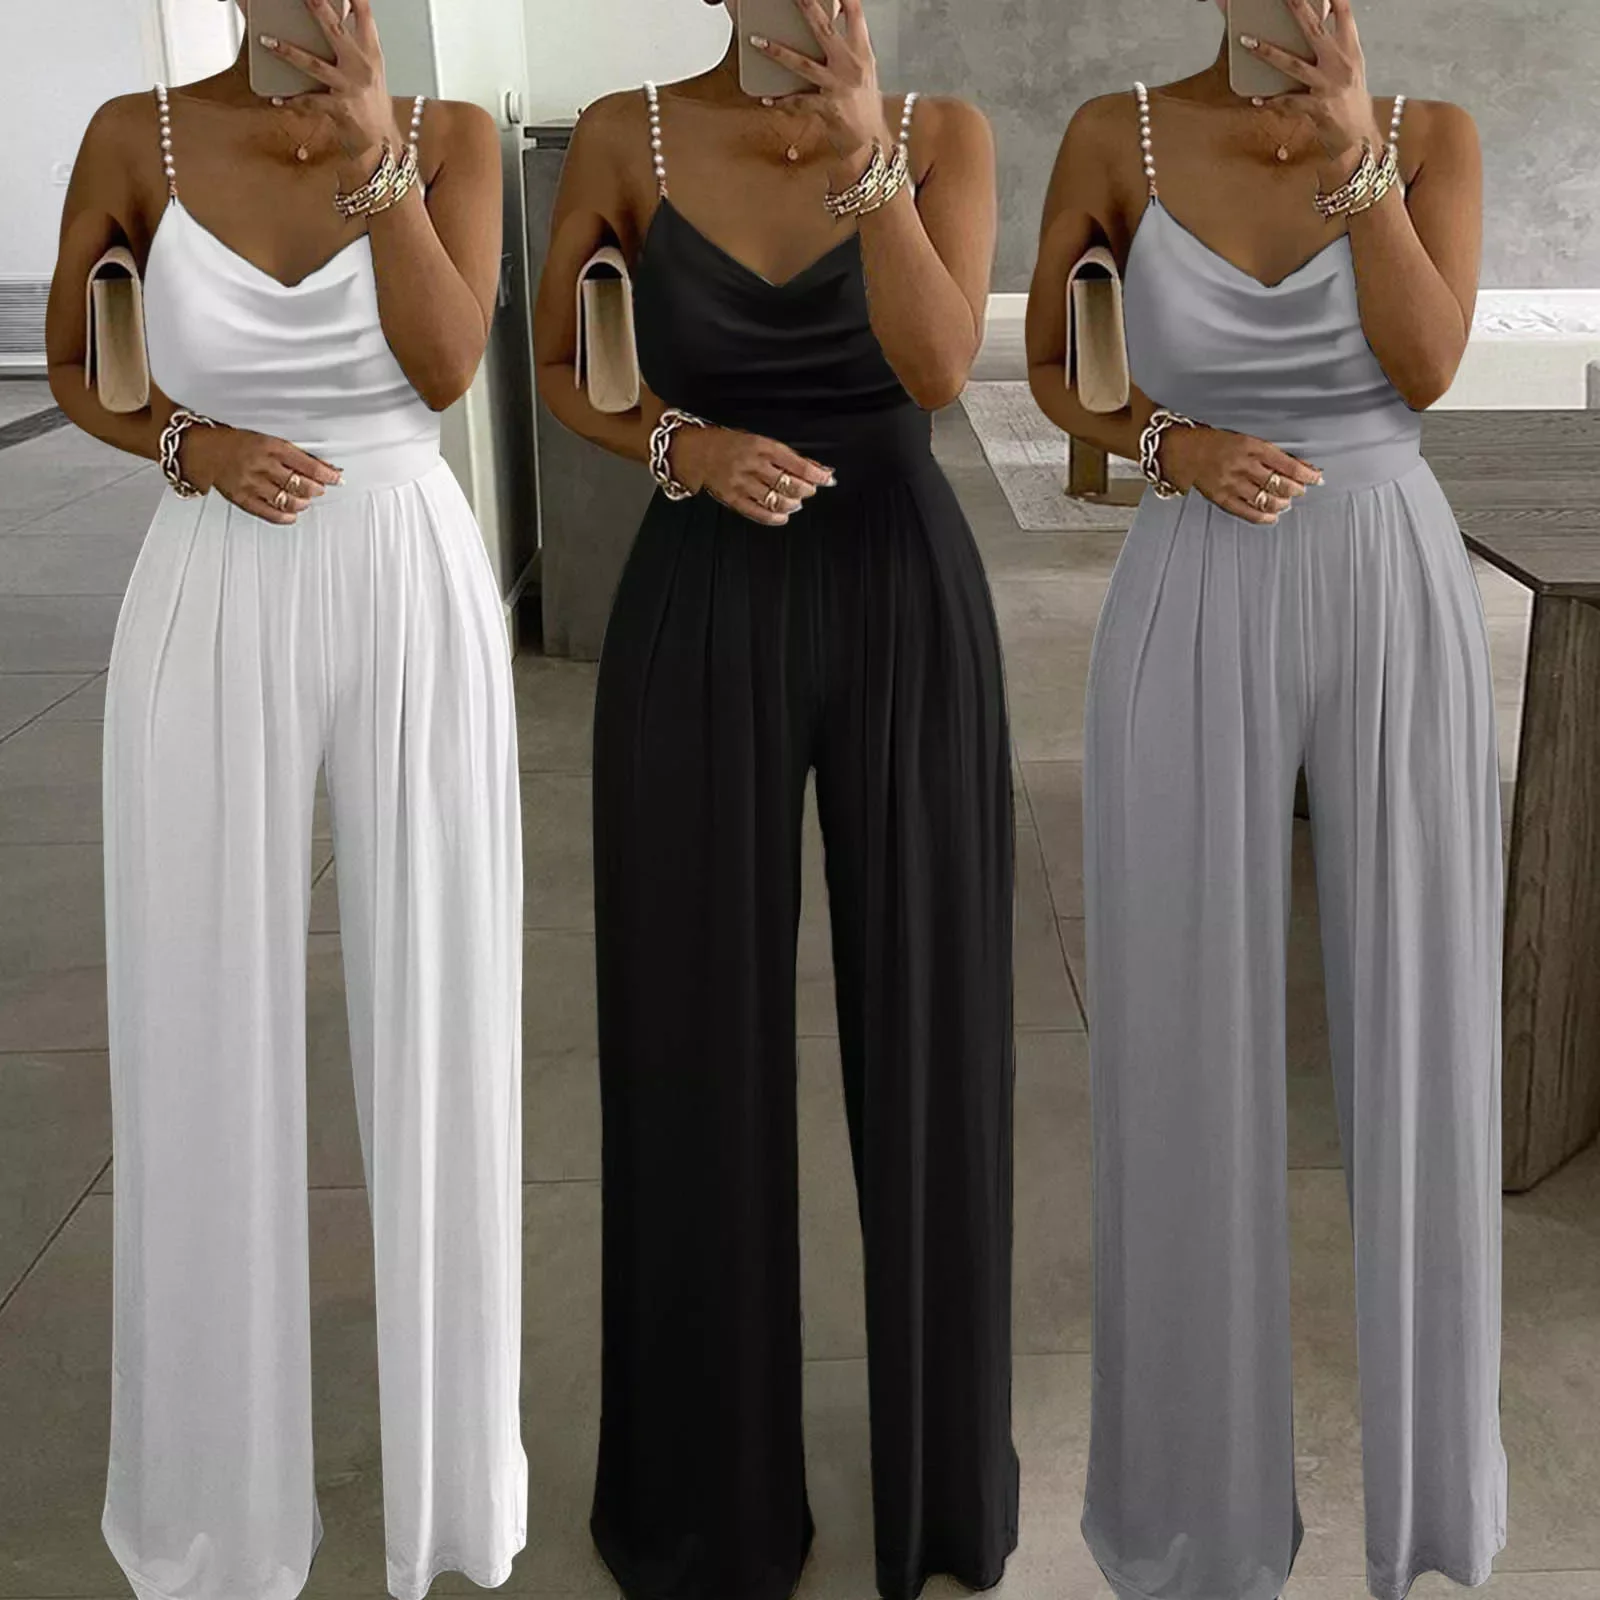 New in Rompers 2022 Summer Sexy Soild Pearl Sling Top Jumpsuits Women Straps Wide Leg Playsuits Casual V-Neck Overall Bodysuit j